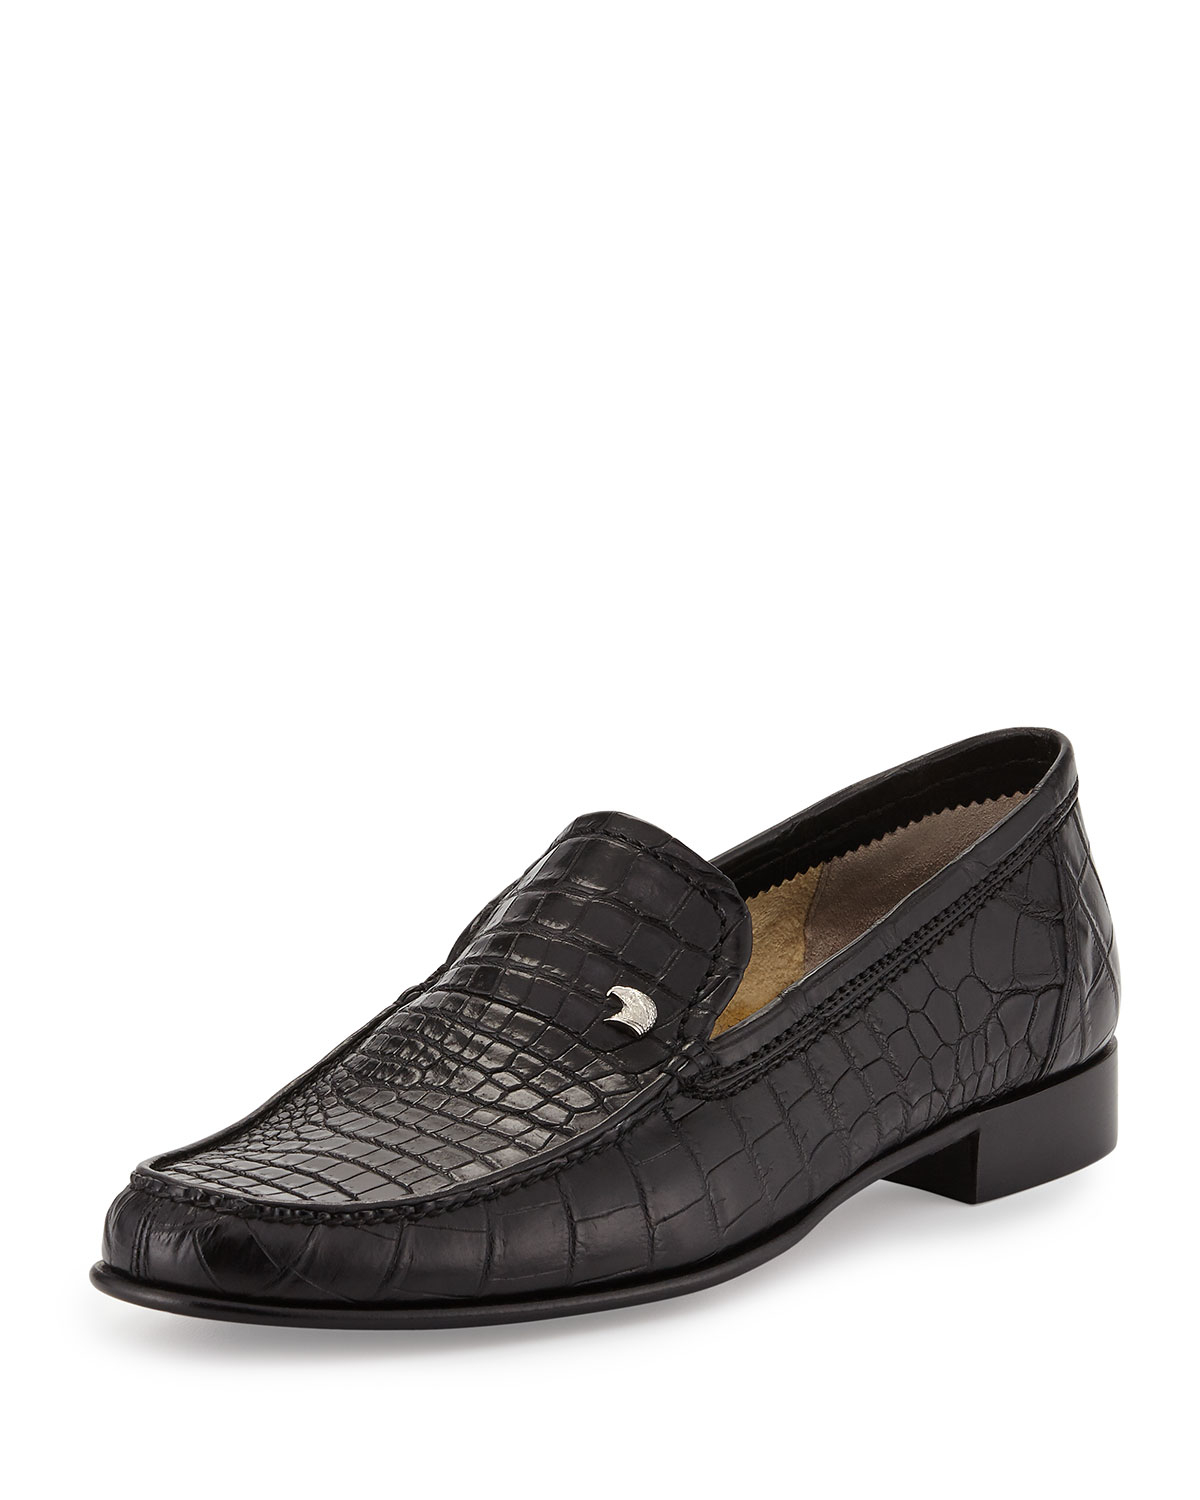 Stefano ricci Crocodile Leather Loafer in Black for Men | Lyst